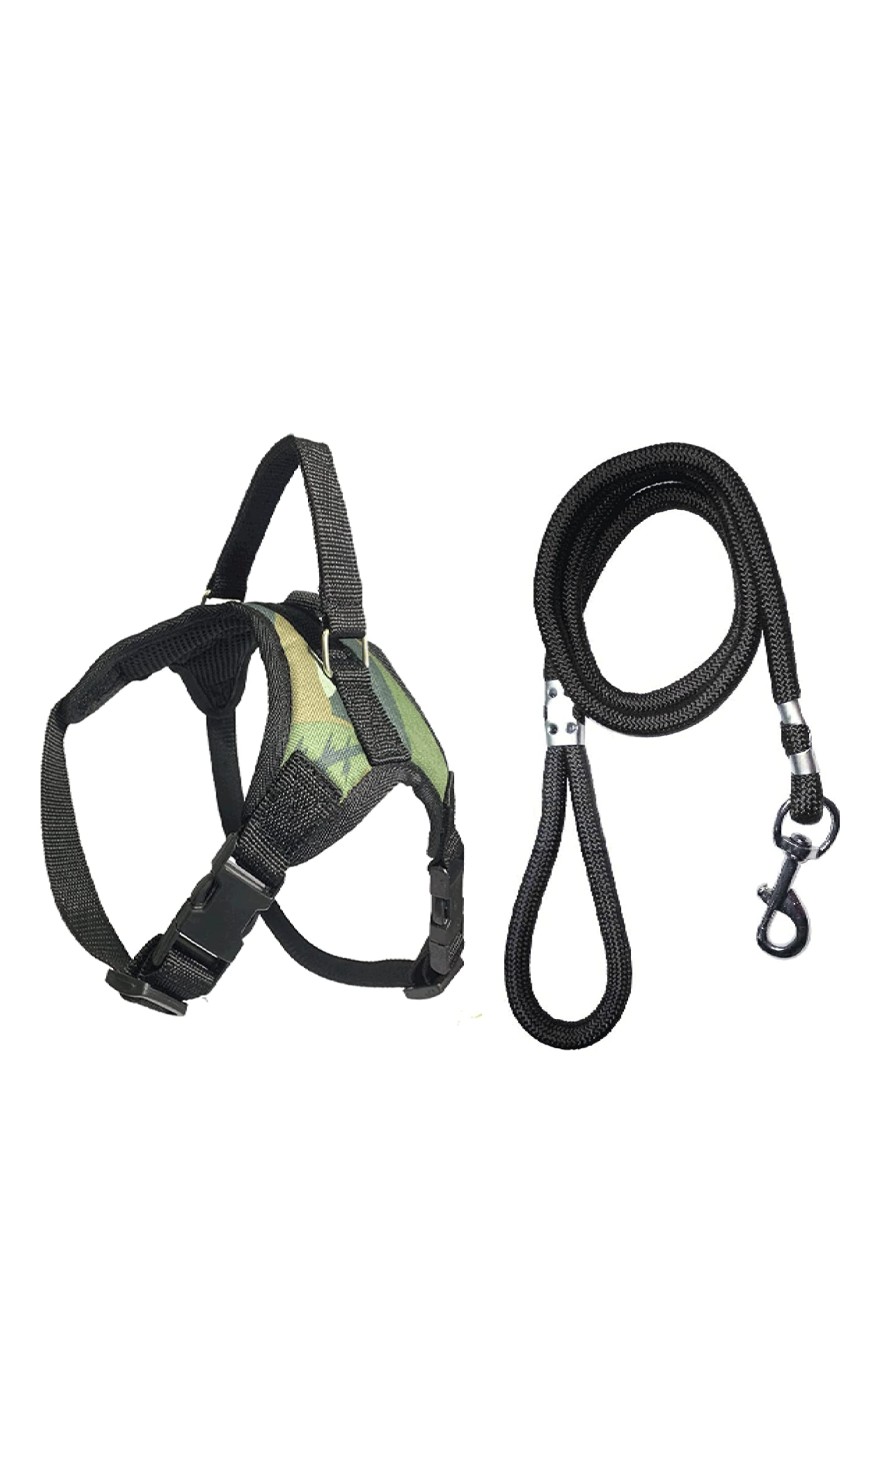 Chest Body Pull Harness Vest